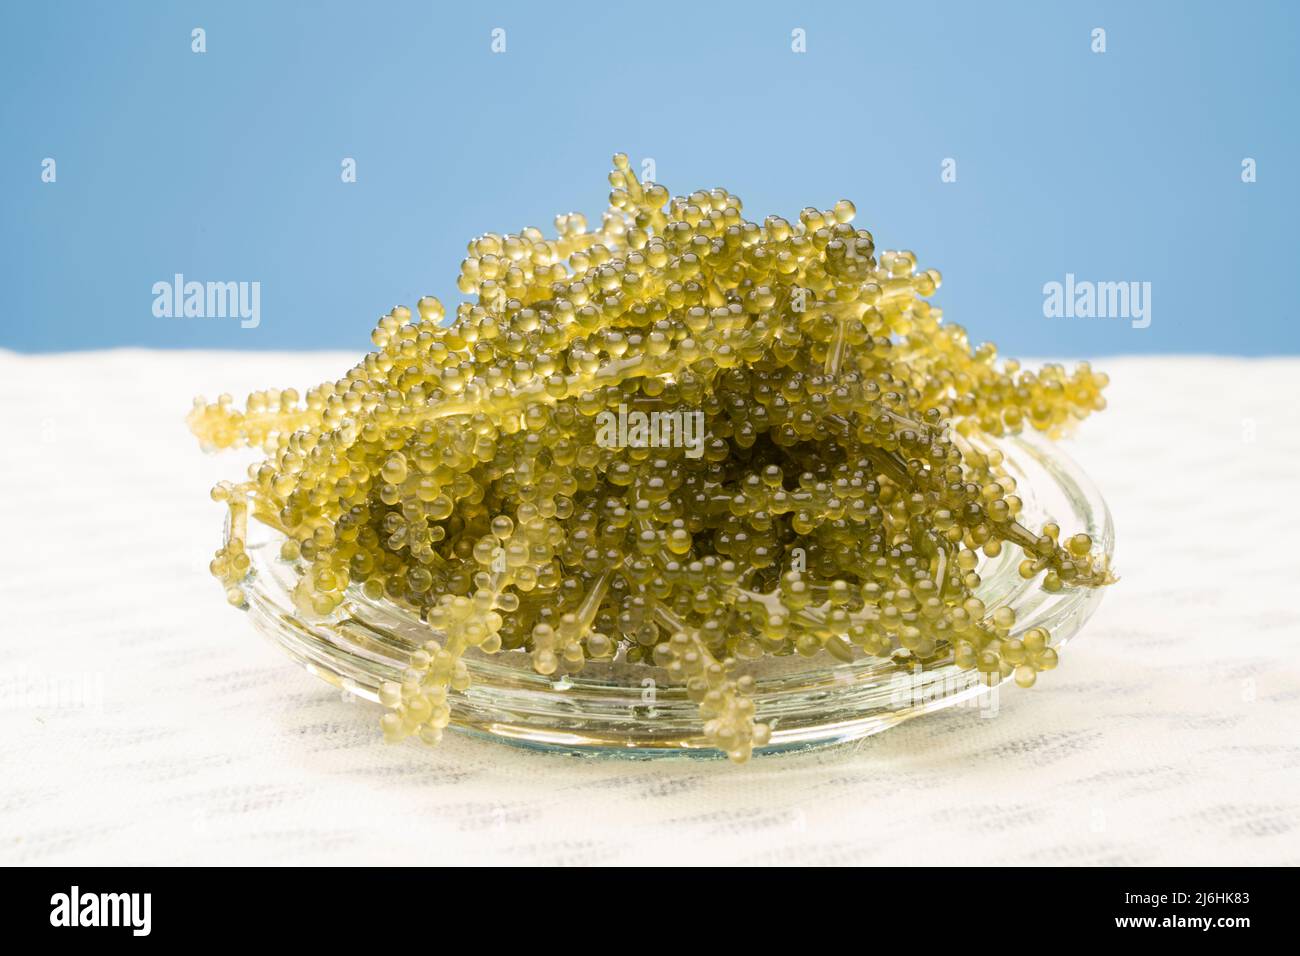 Umibudou or sea grapes a popular seaweed / algae eaten in Okinawa, Japan and known for its puchi puchi popping sensation. Stock Photo